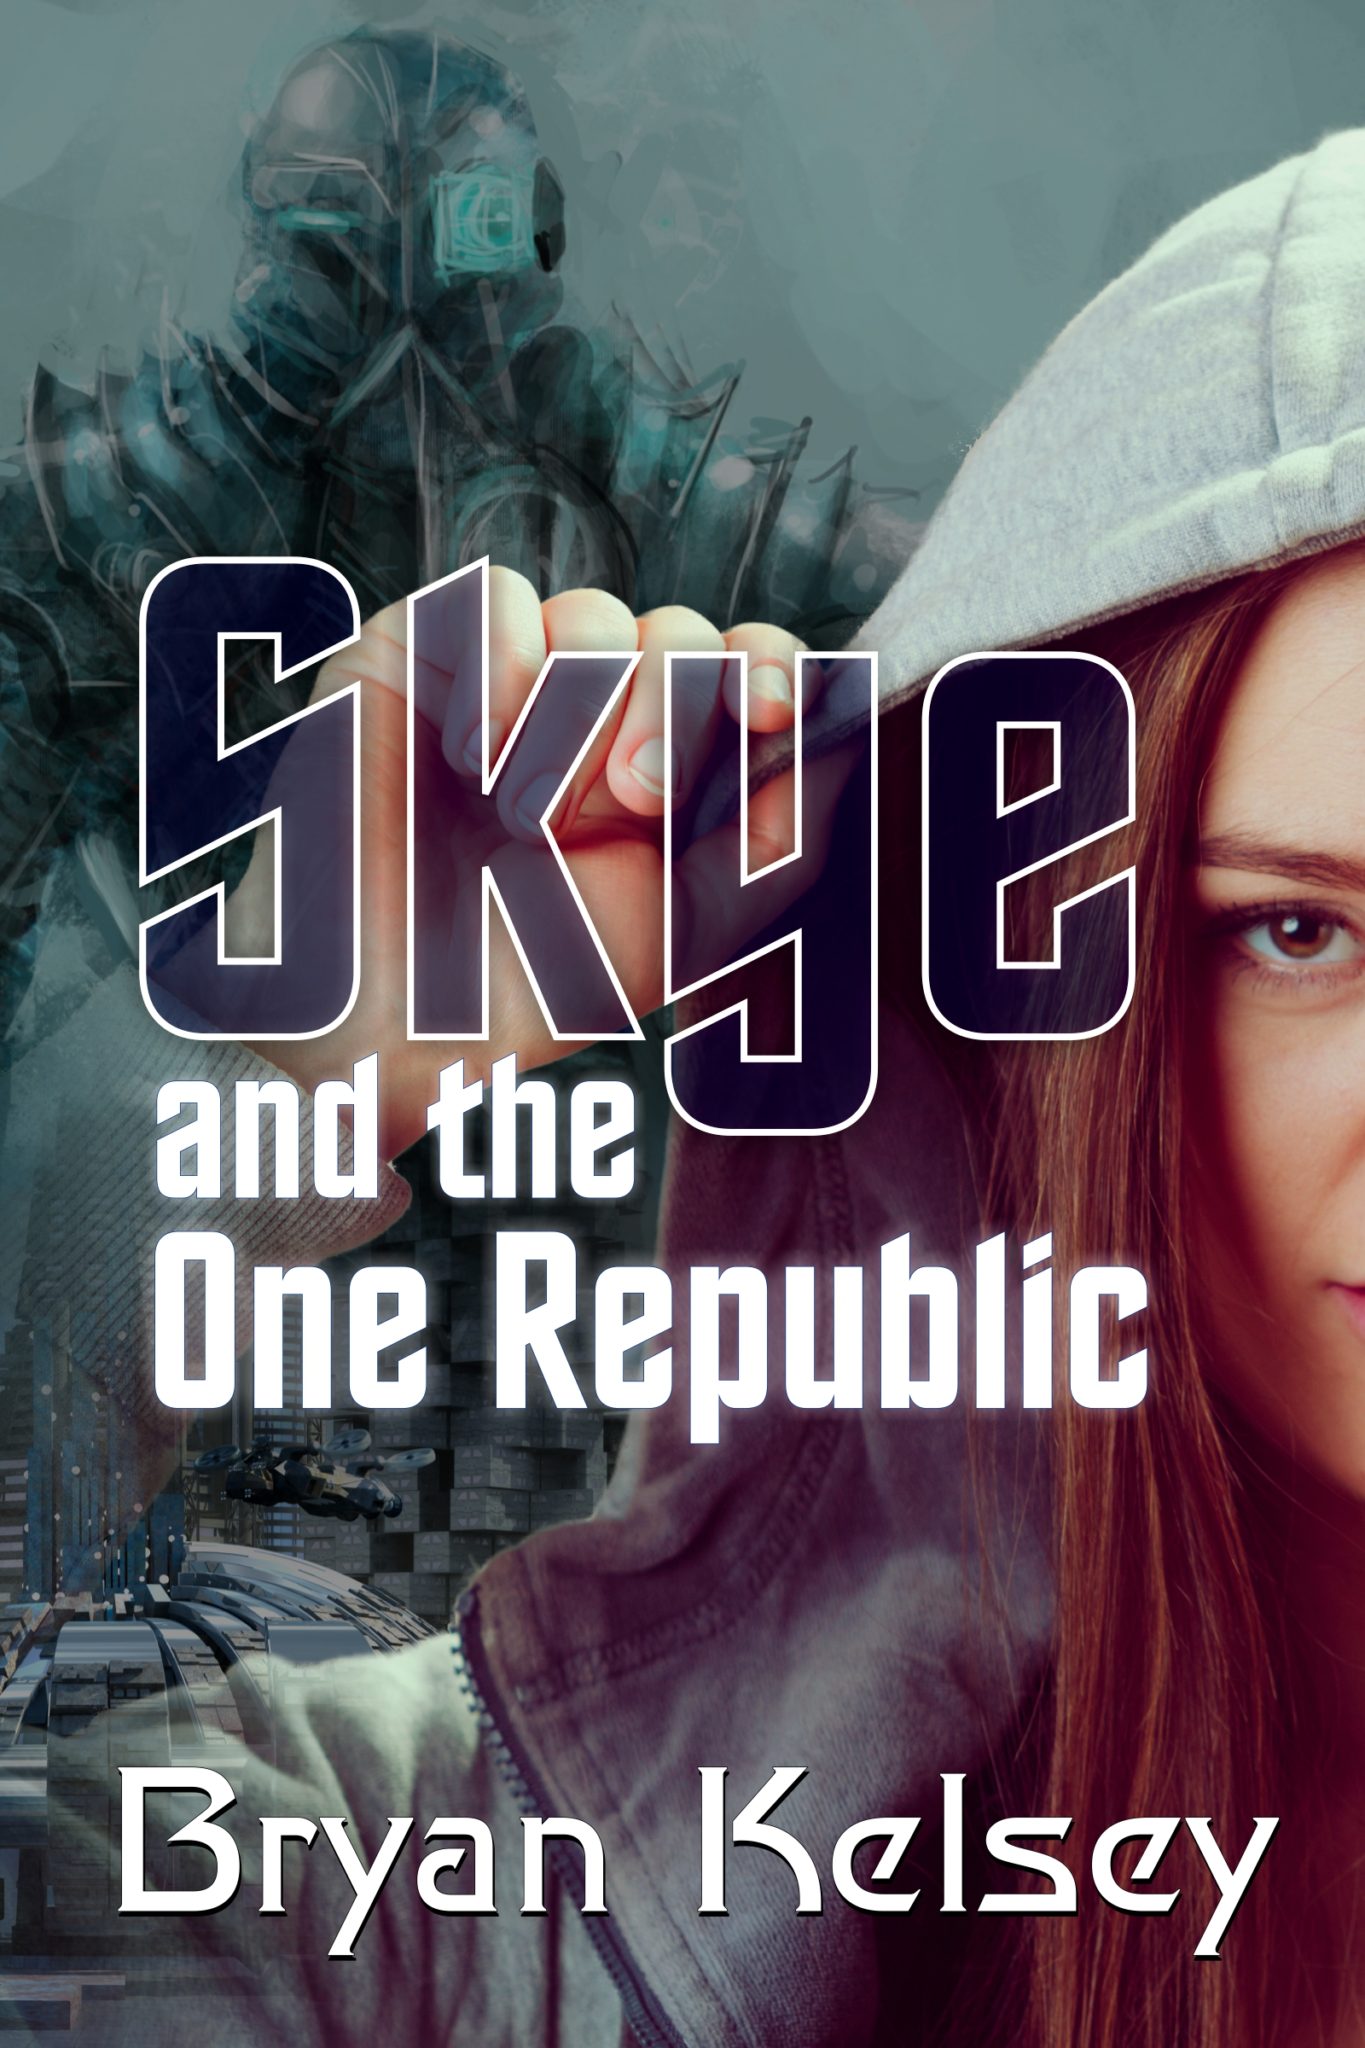 FREE: Skye and the One Republic by Bryan Kelsey